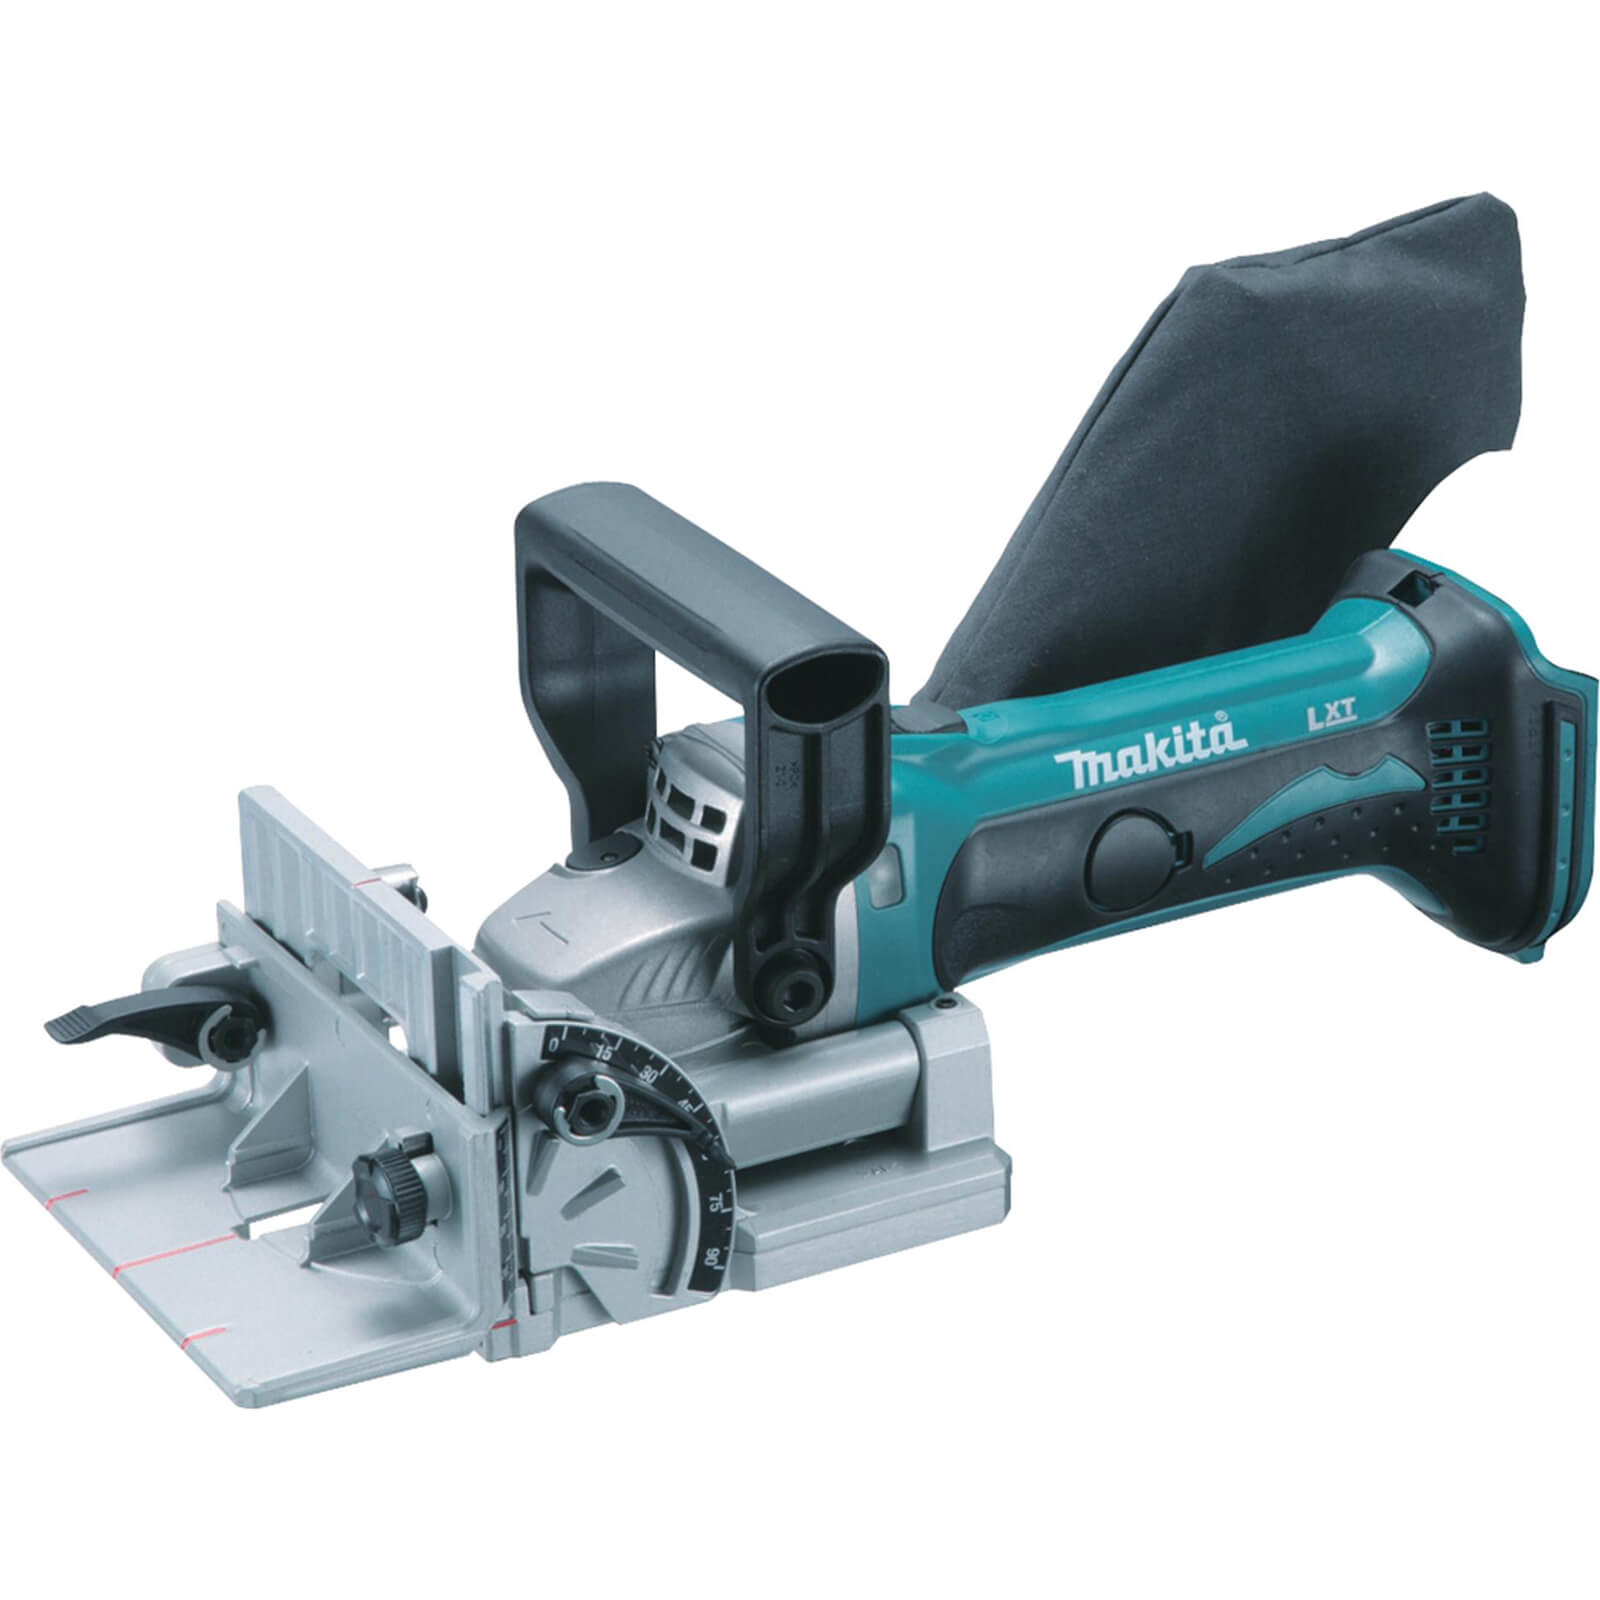 Photo of Makita Dpj180 18v Cordless Lxt Biscuit Jointer No Batteries No Charger No Case